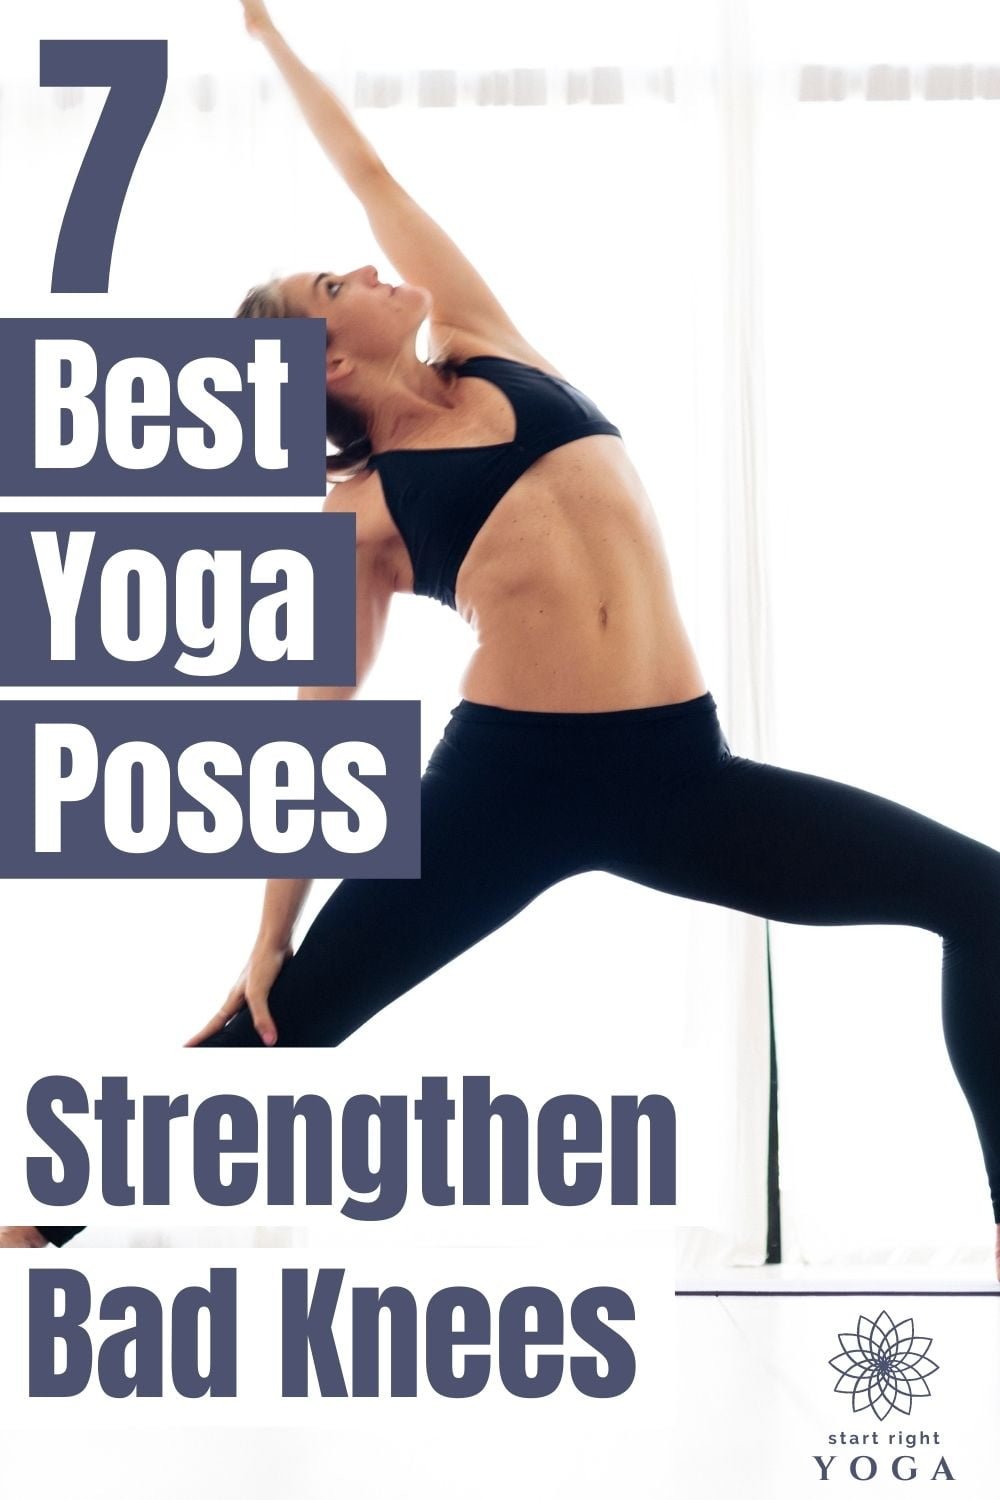 The Best and Worst Yoga Poses for Bad Knees - YOGA PRACTICE